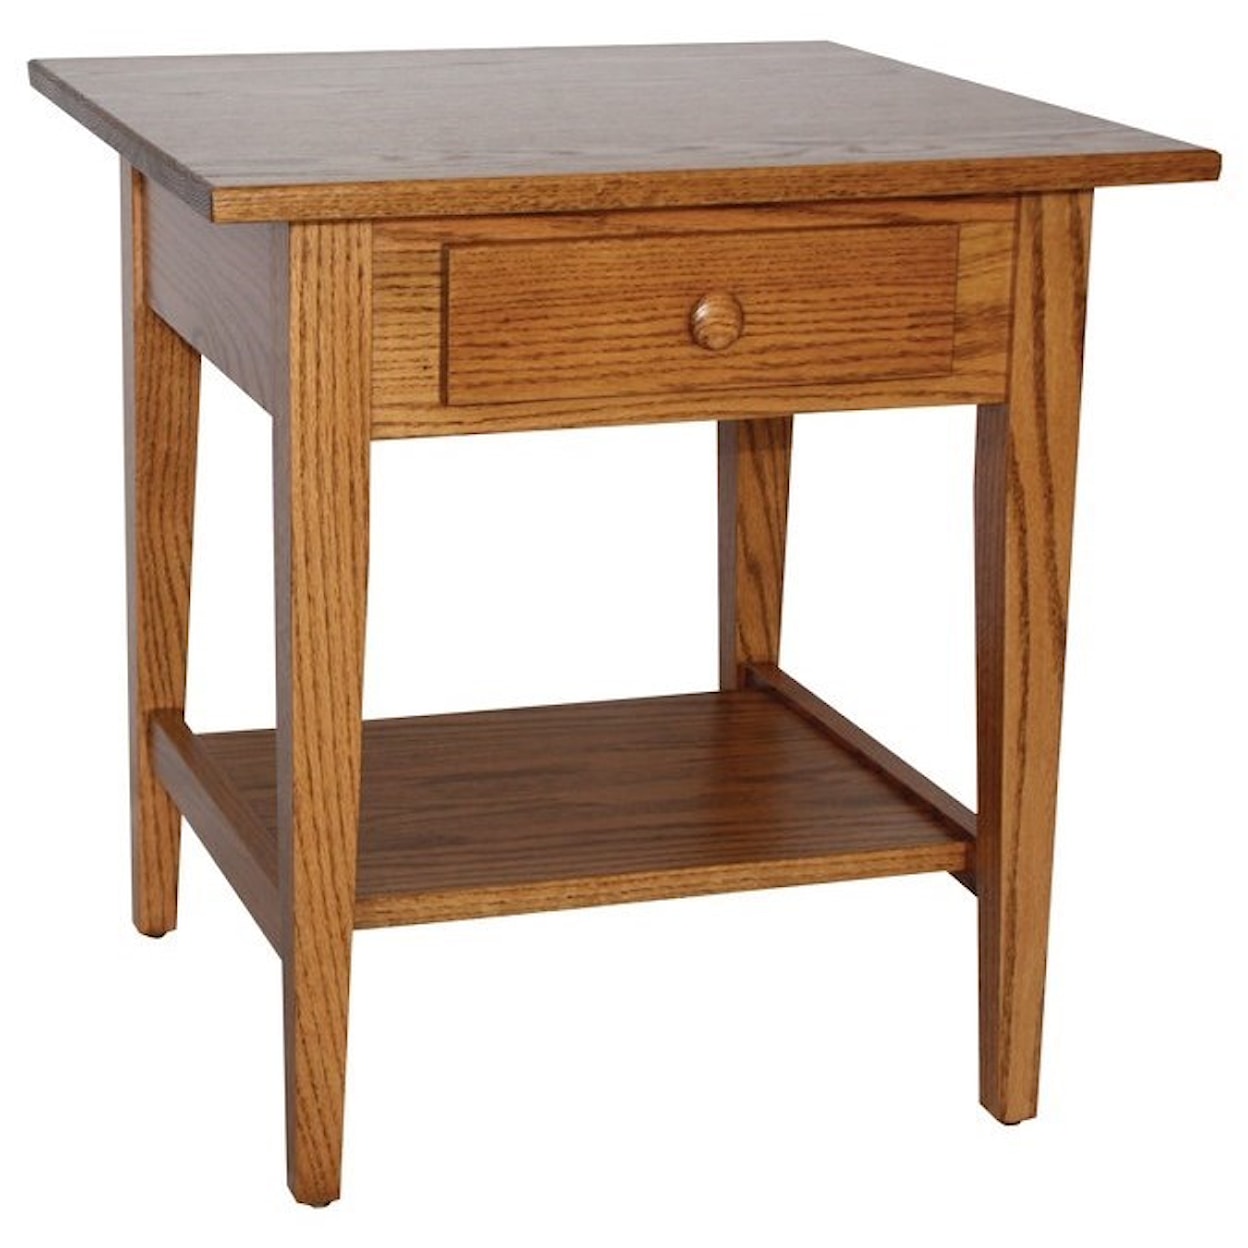 Ashery Woodworking Shaker Style Customizable Solid Wood End Table